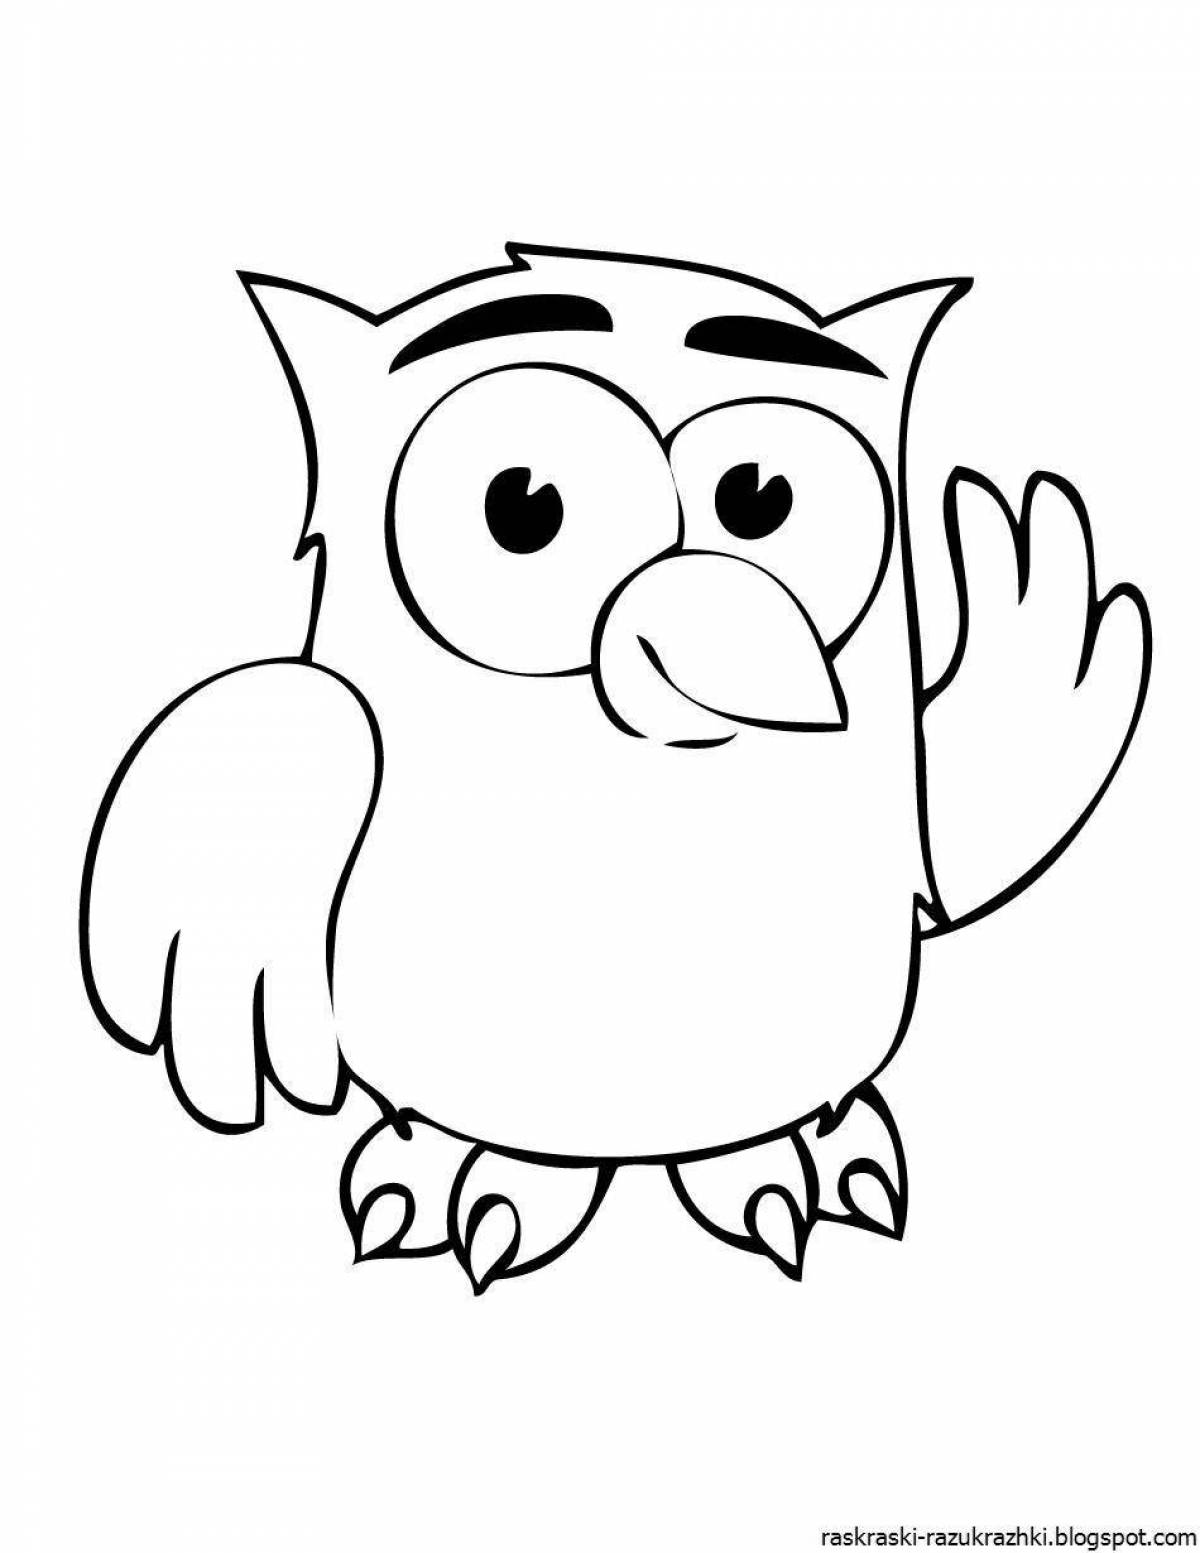 Creative owl coloring book for kids